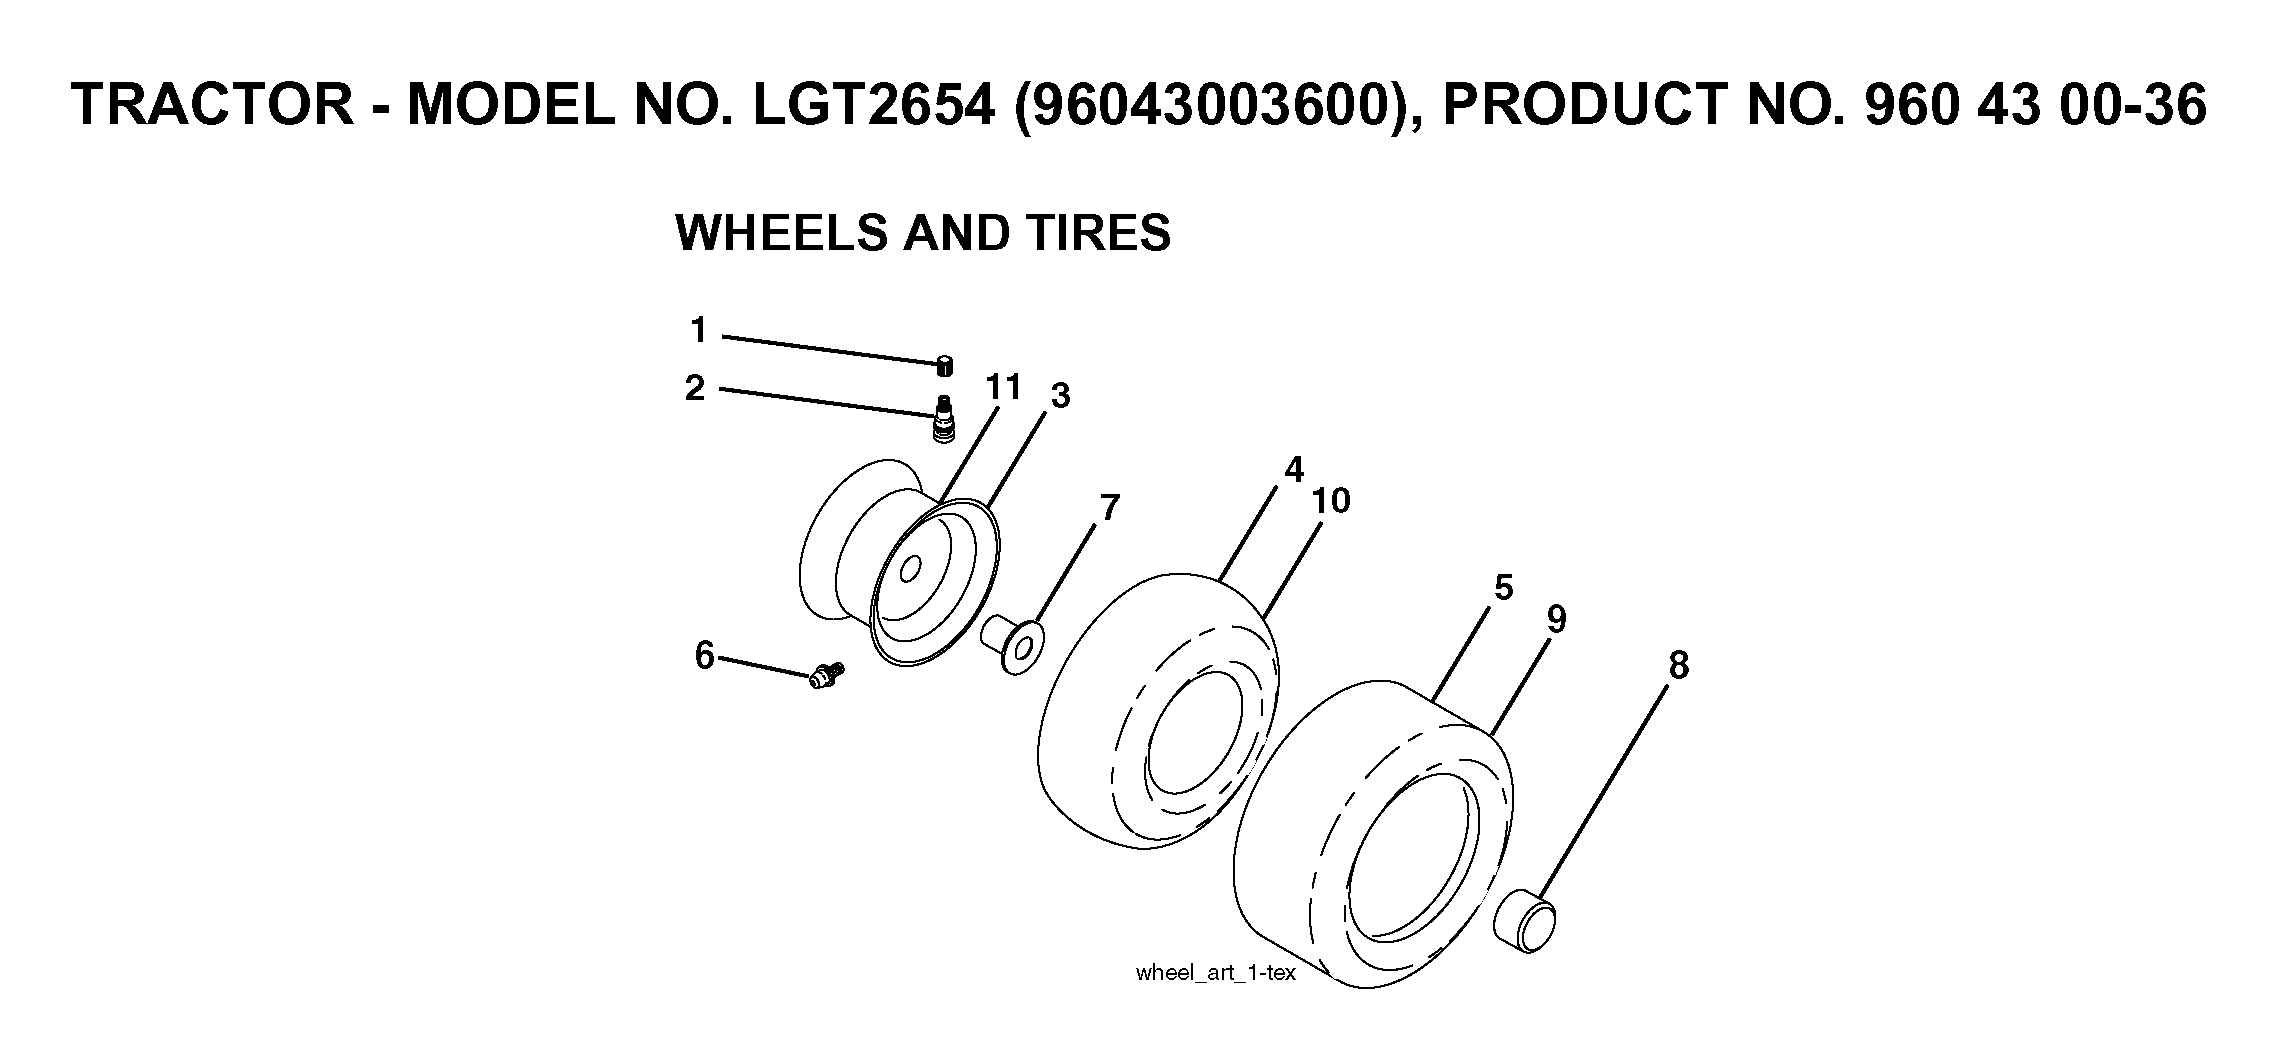 Wheels and tires 532059192, 532065139, 532148736, 532059904, 532106230, 532000278, 532009040, 532104757, 532184708, 532184708, 532401782, 576707201